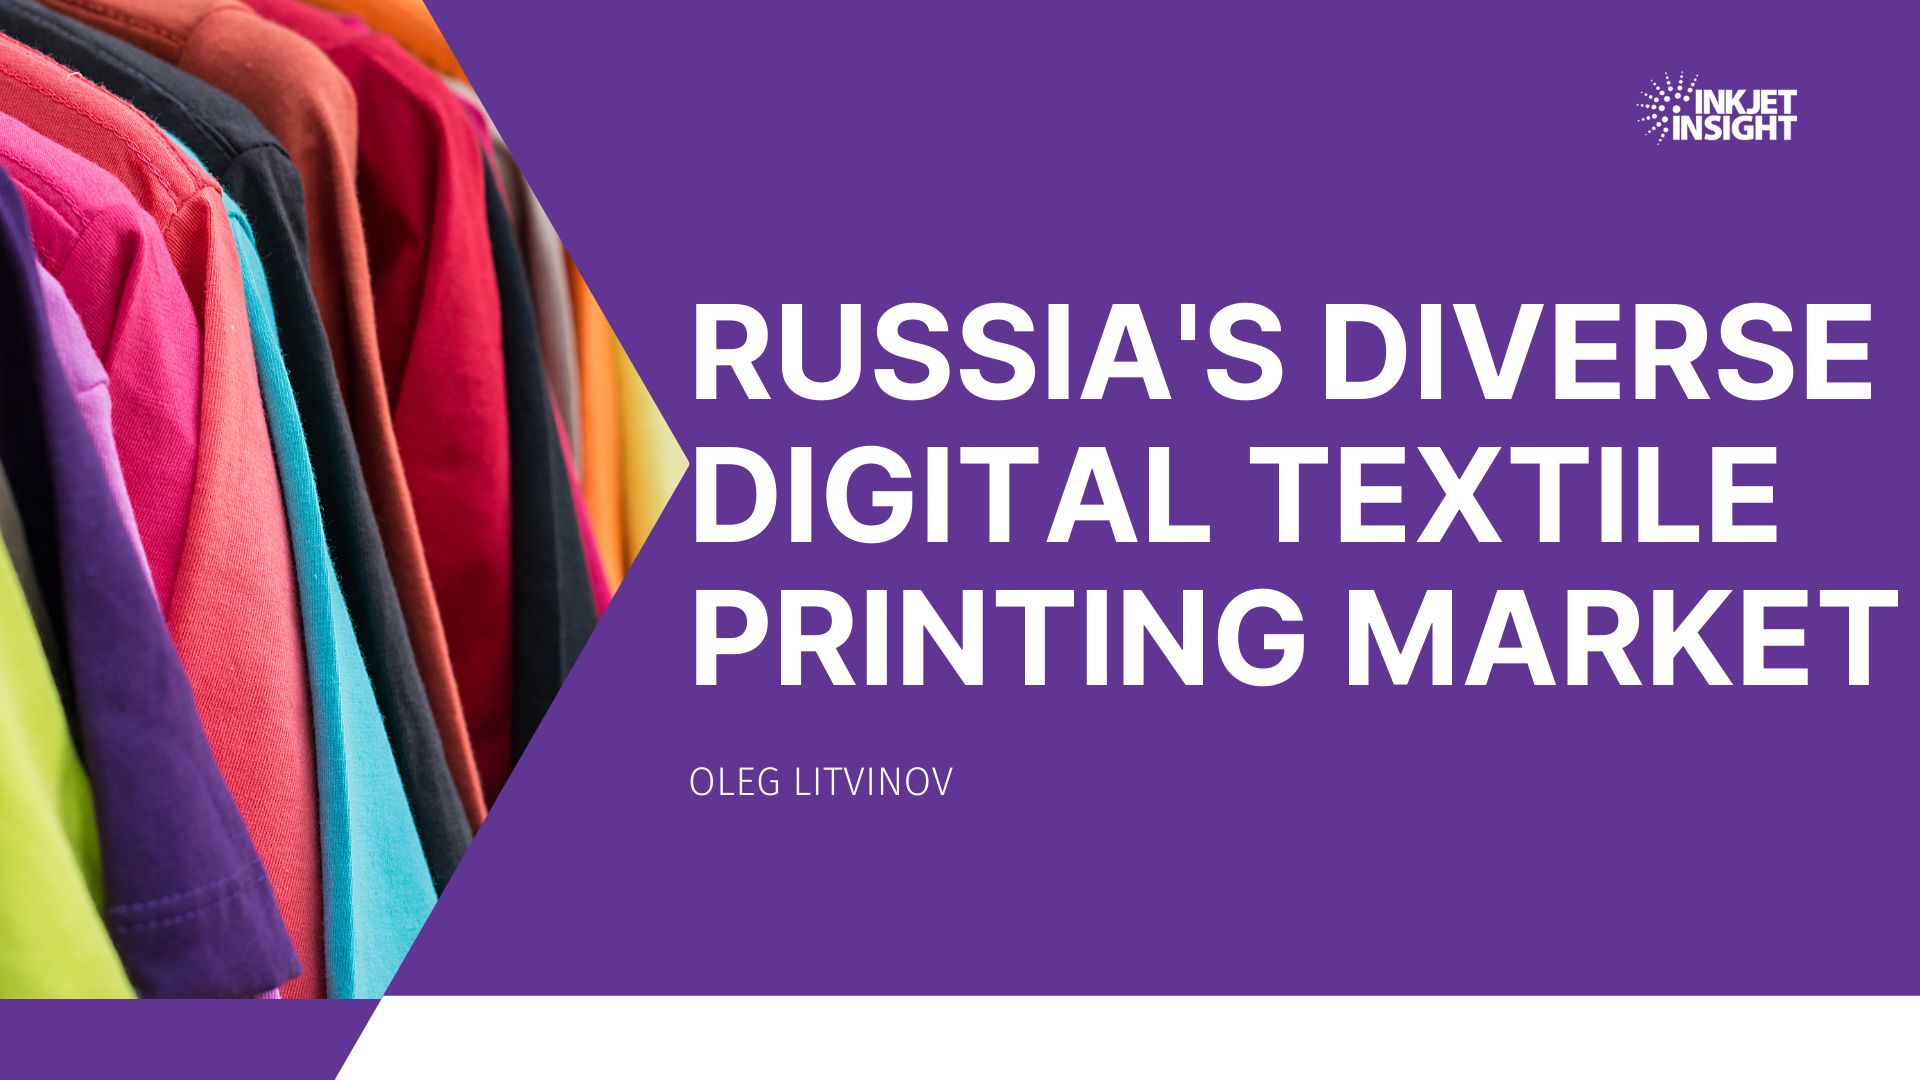 Featured image for “Russia’s Diverse Digital Textile Printing Market”